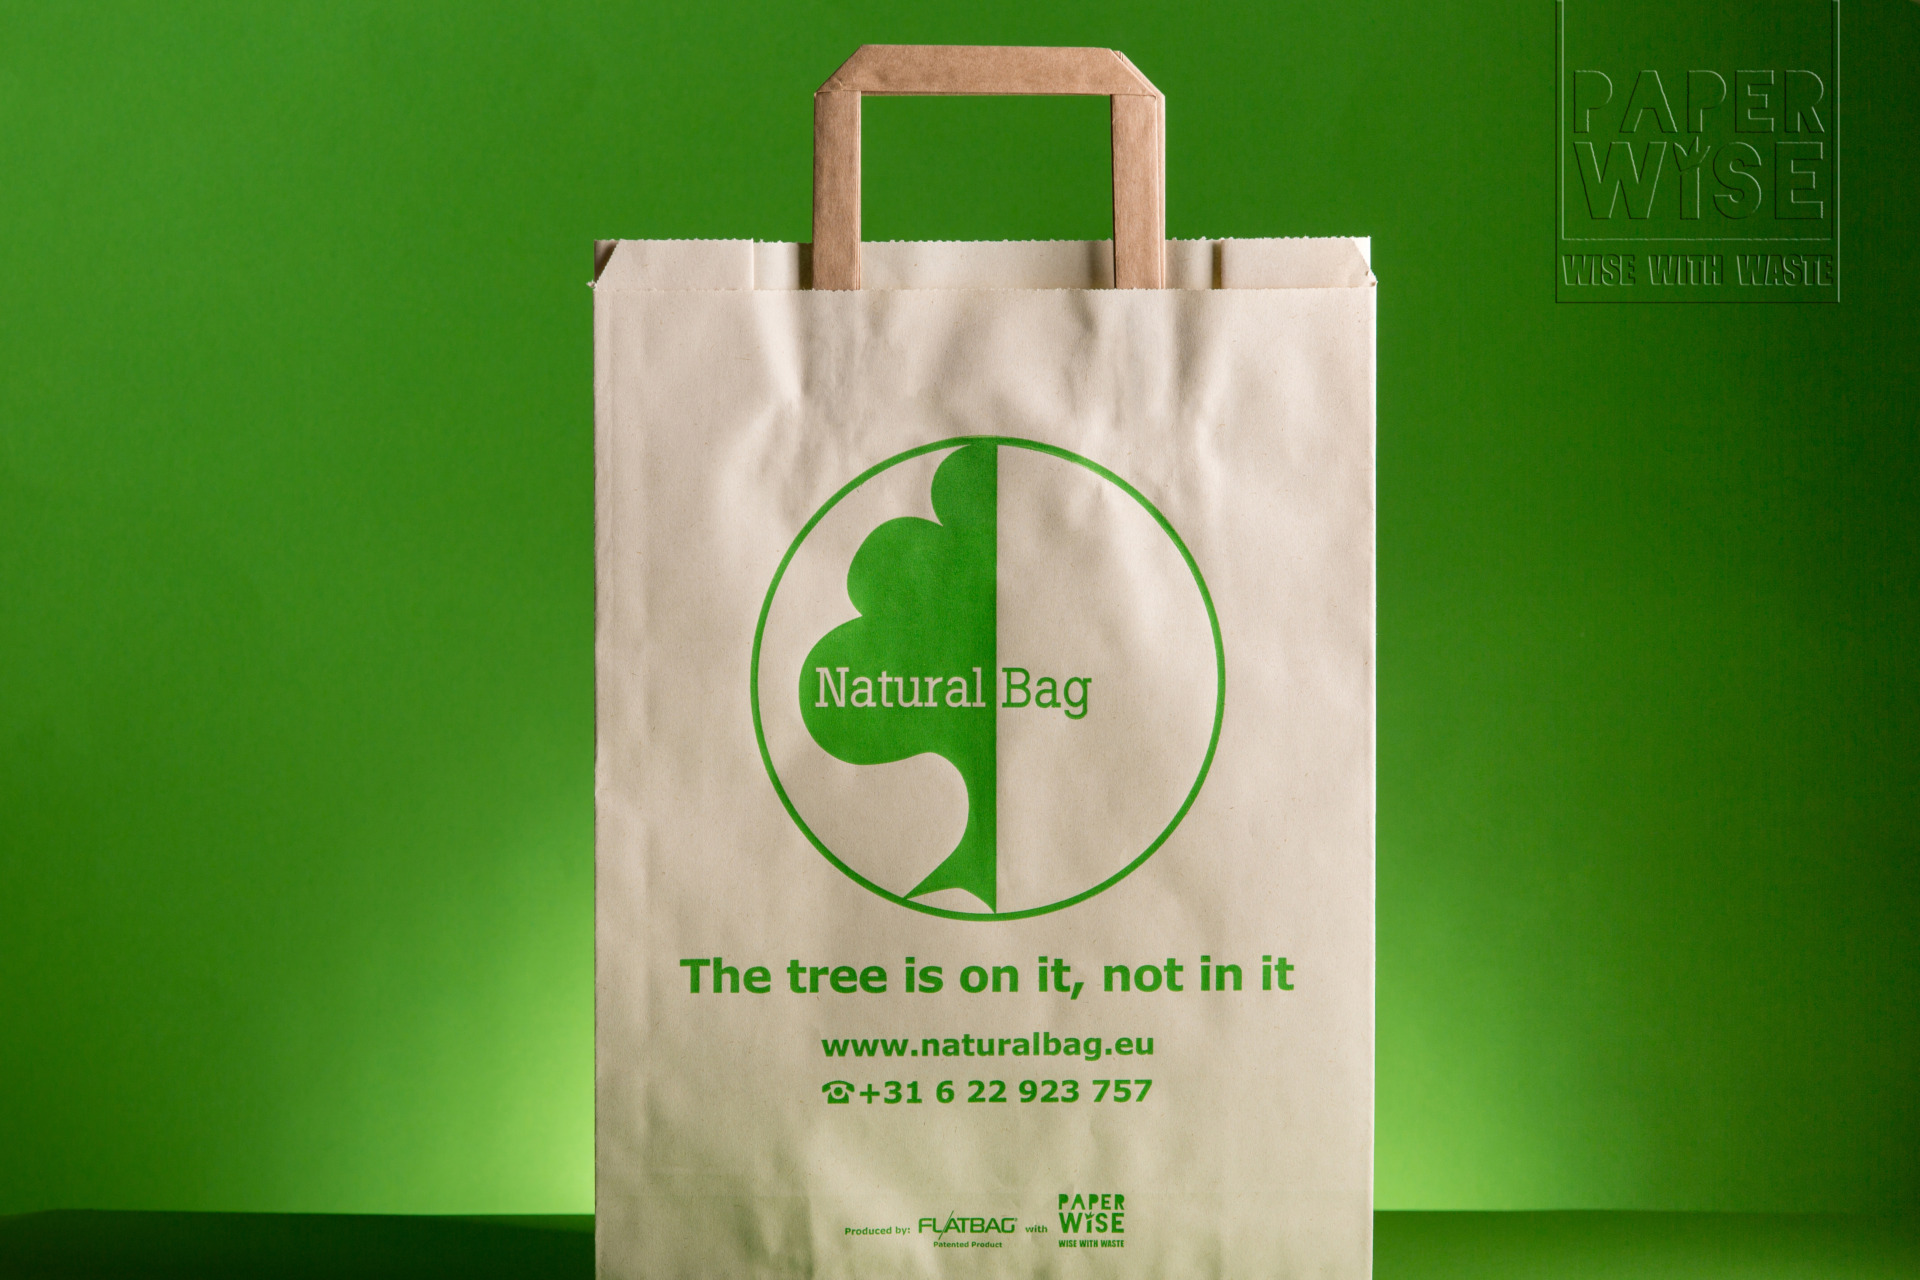 wp content uploads  0    0  organic paper board treefree bag paperbag flatbag sustainable packaging naturalbag 4